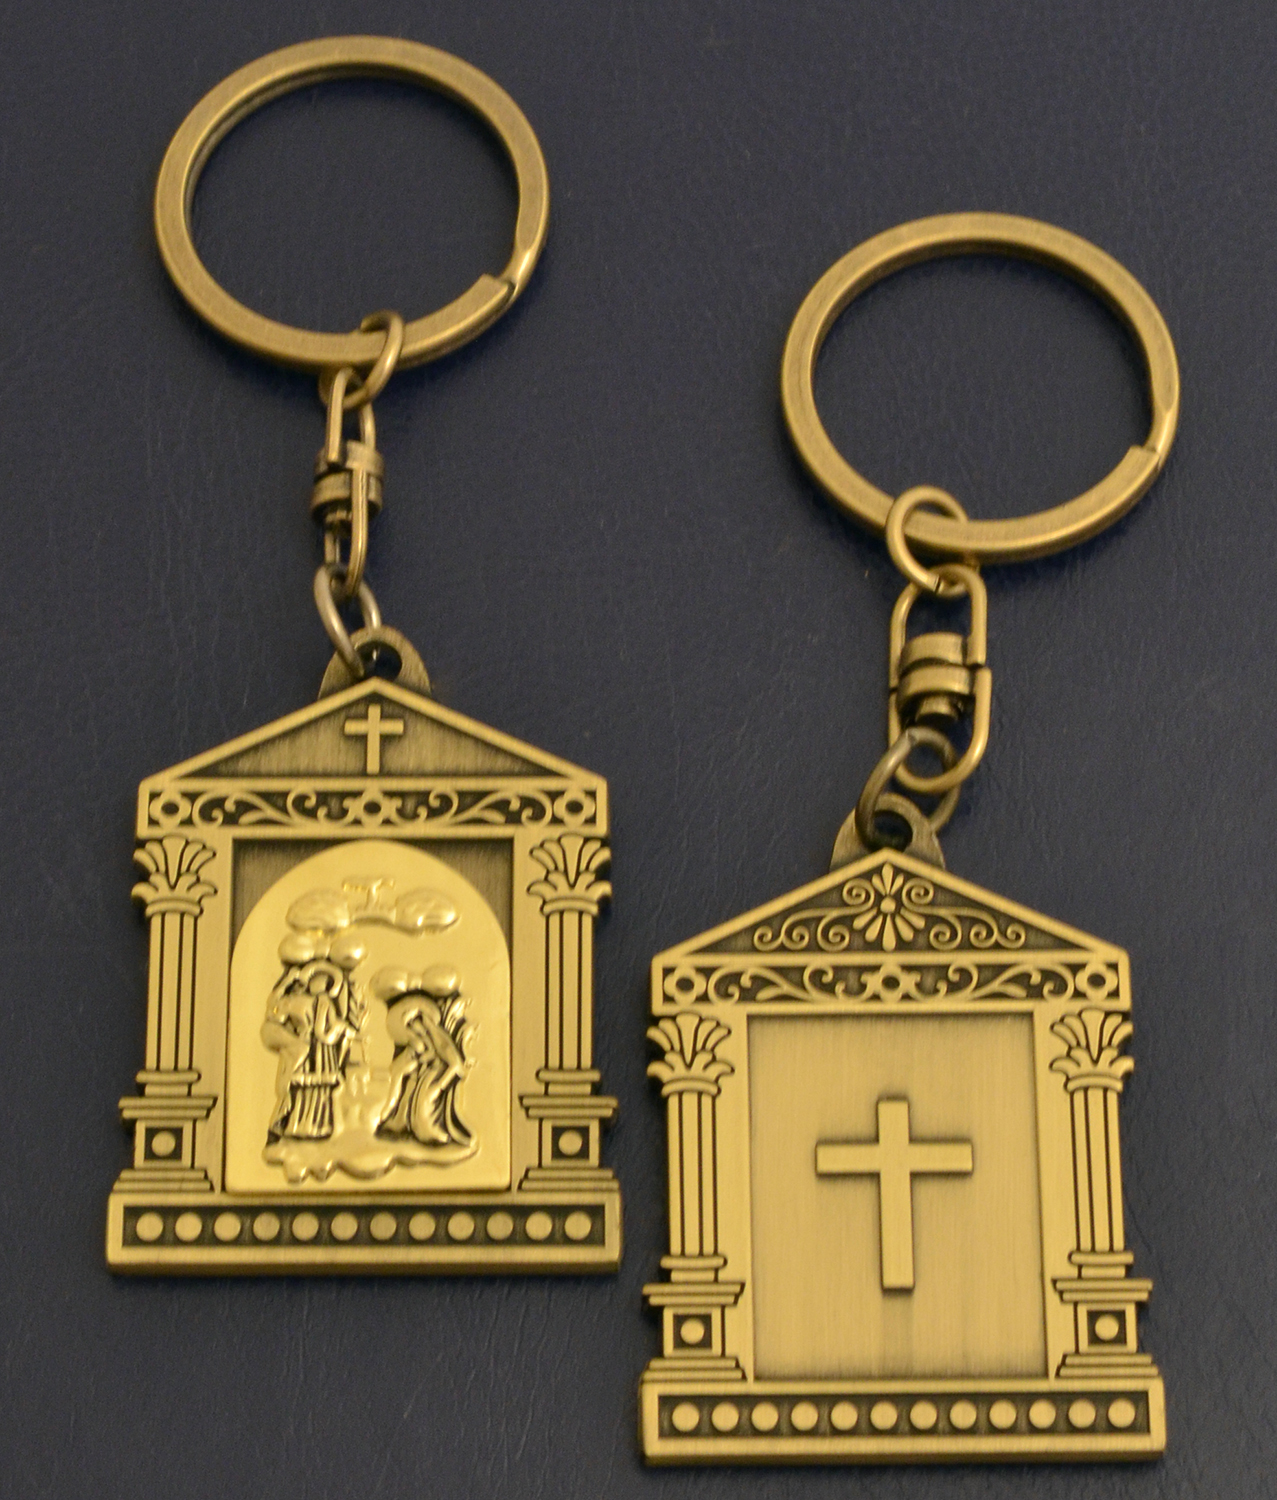 Orthodox Metal Keyring Church Design Antique with Annunciation Holy Icon